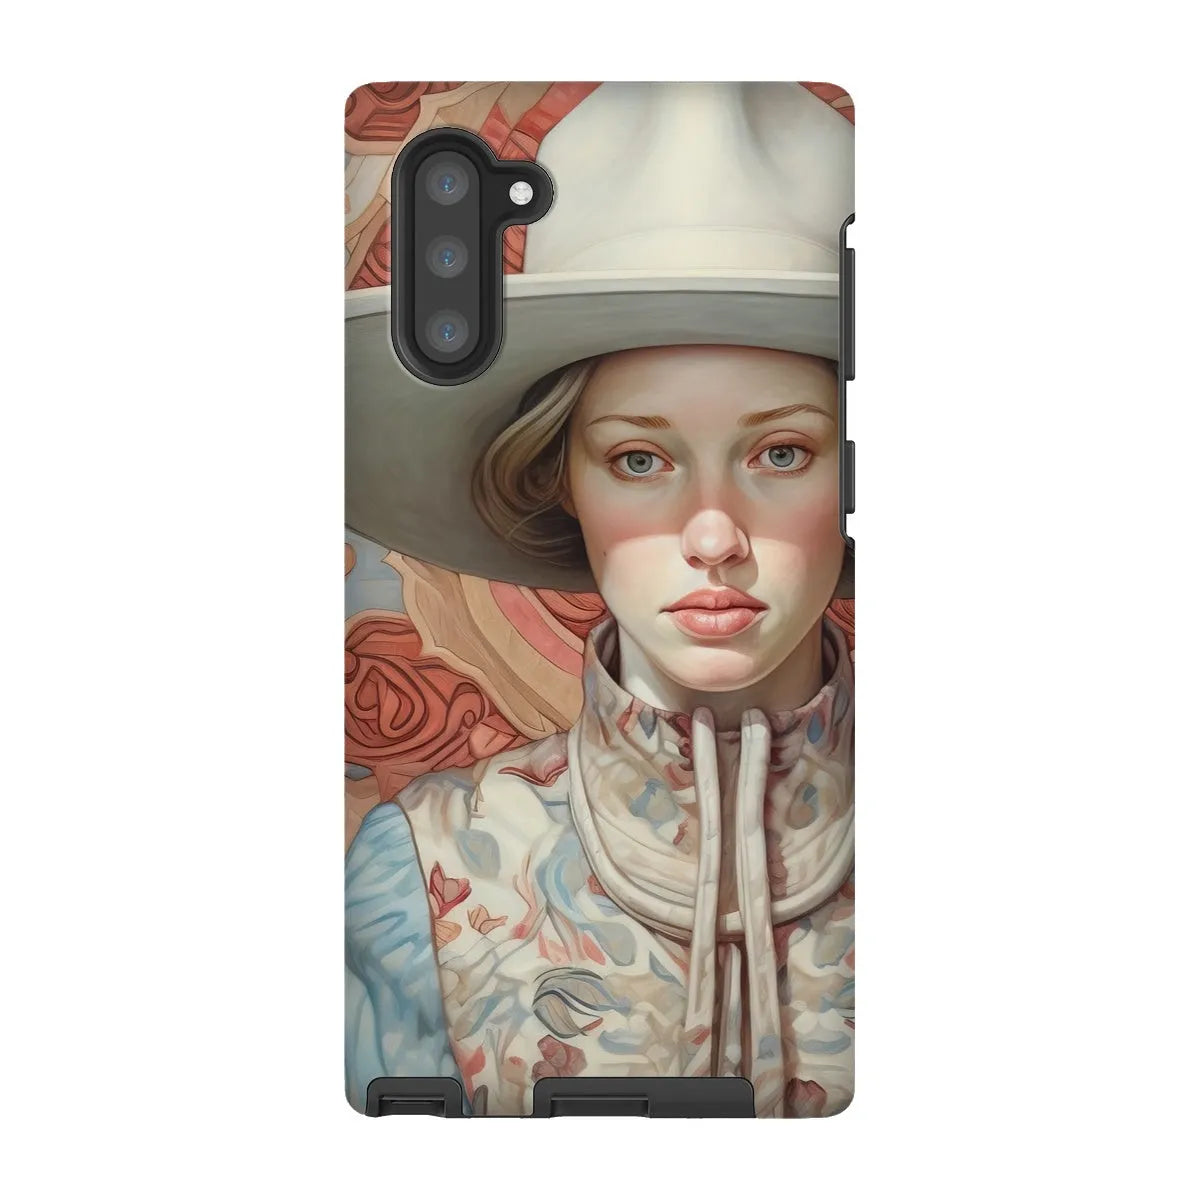 Lottie The Lesbian Cowgirl - Sapphic Art Phone Case - Samsung Galaxy Note 10 / Matte - Mobile Phone Cases - Aesthetic